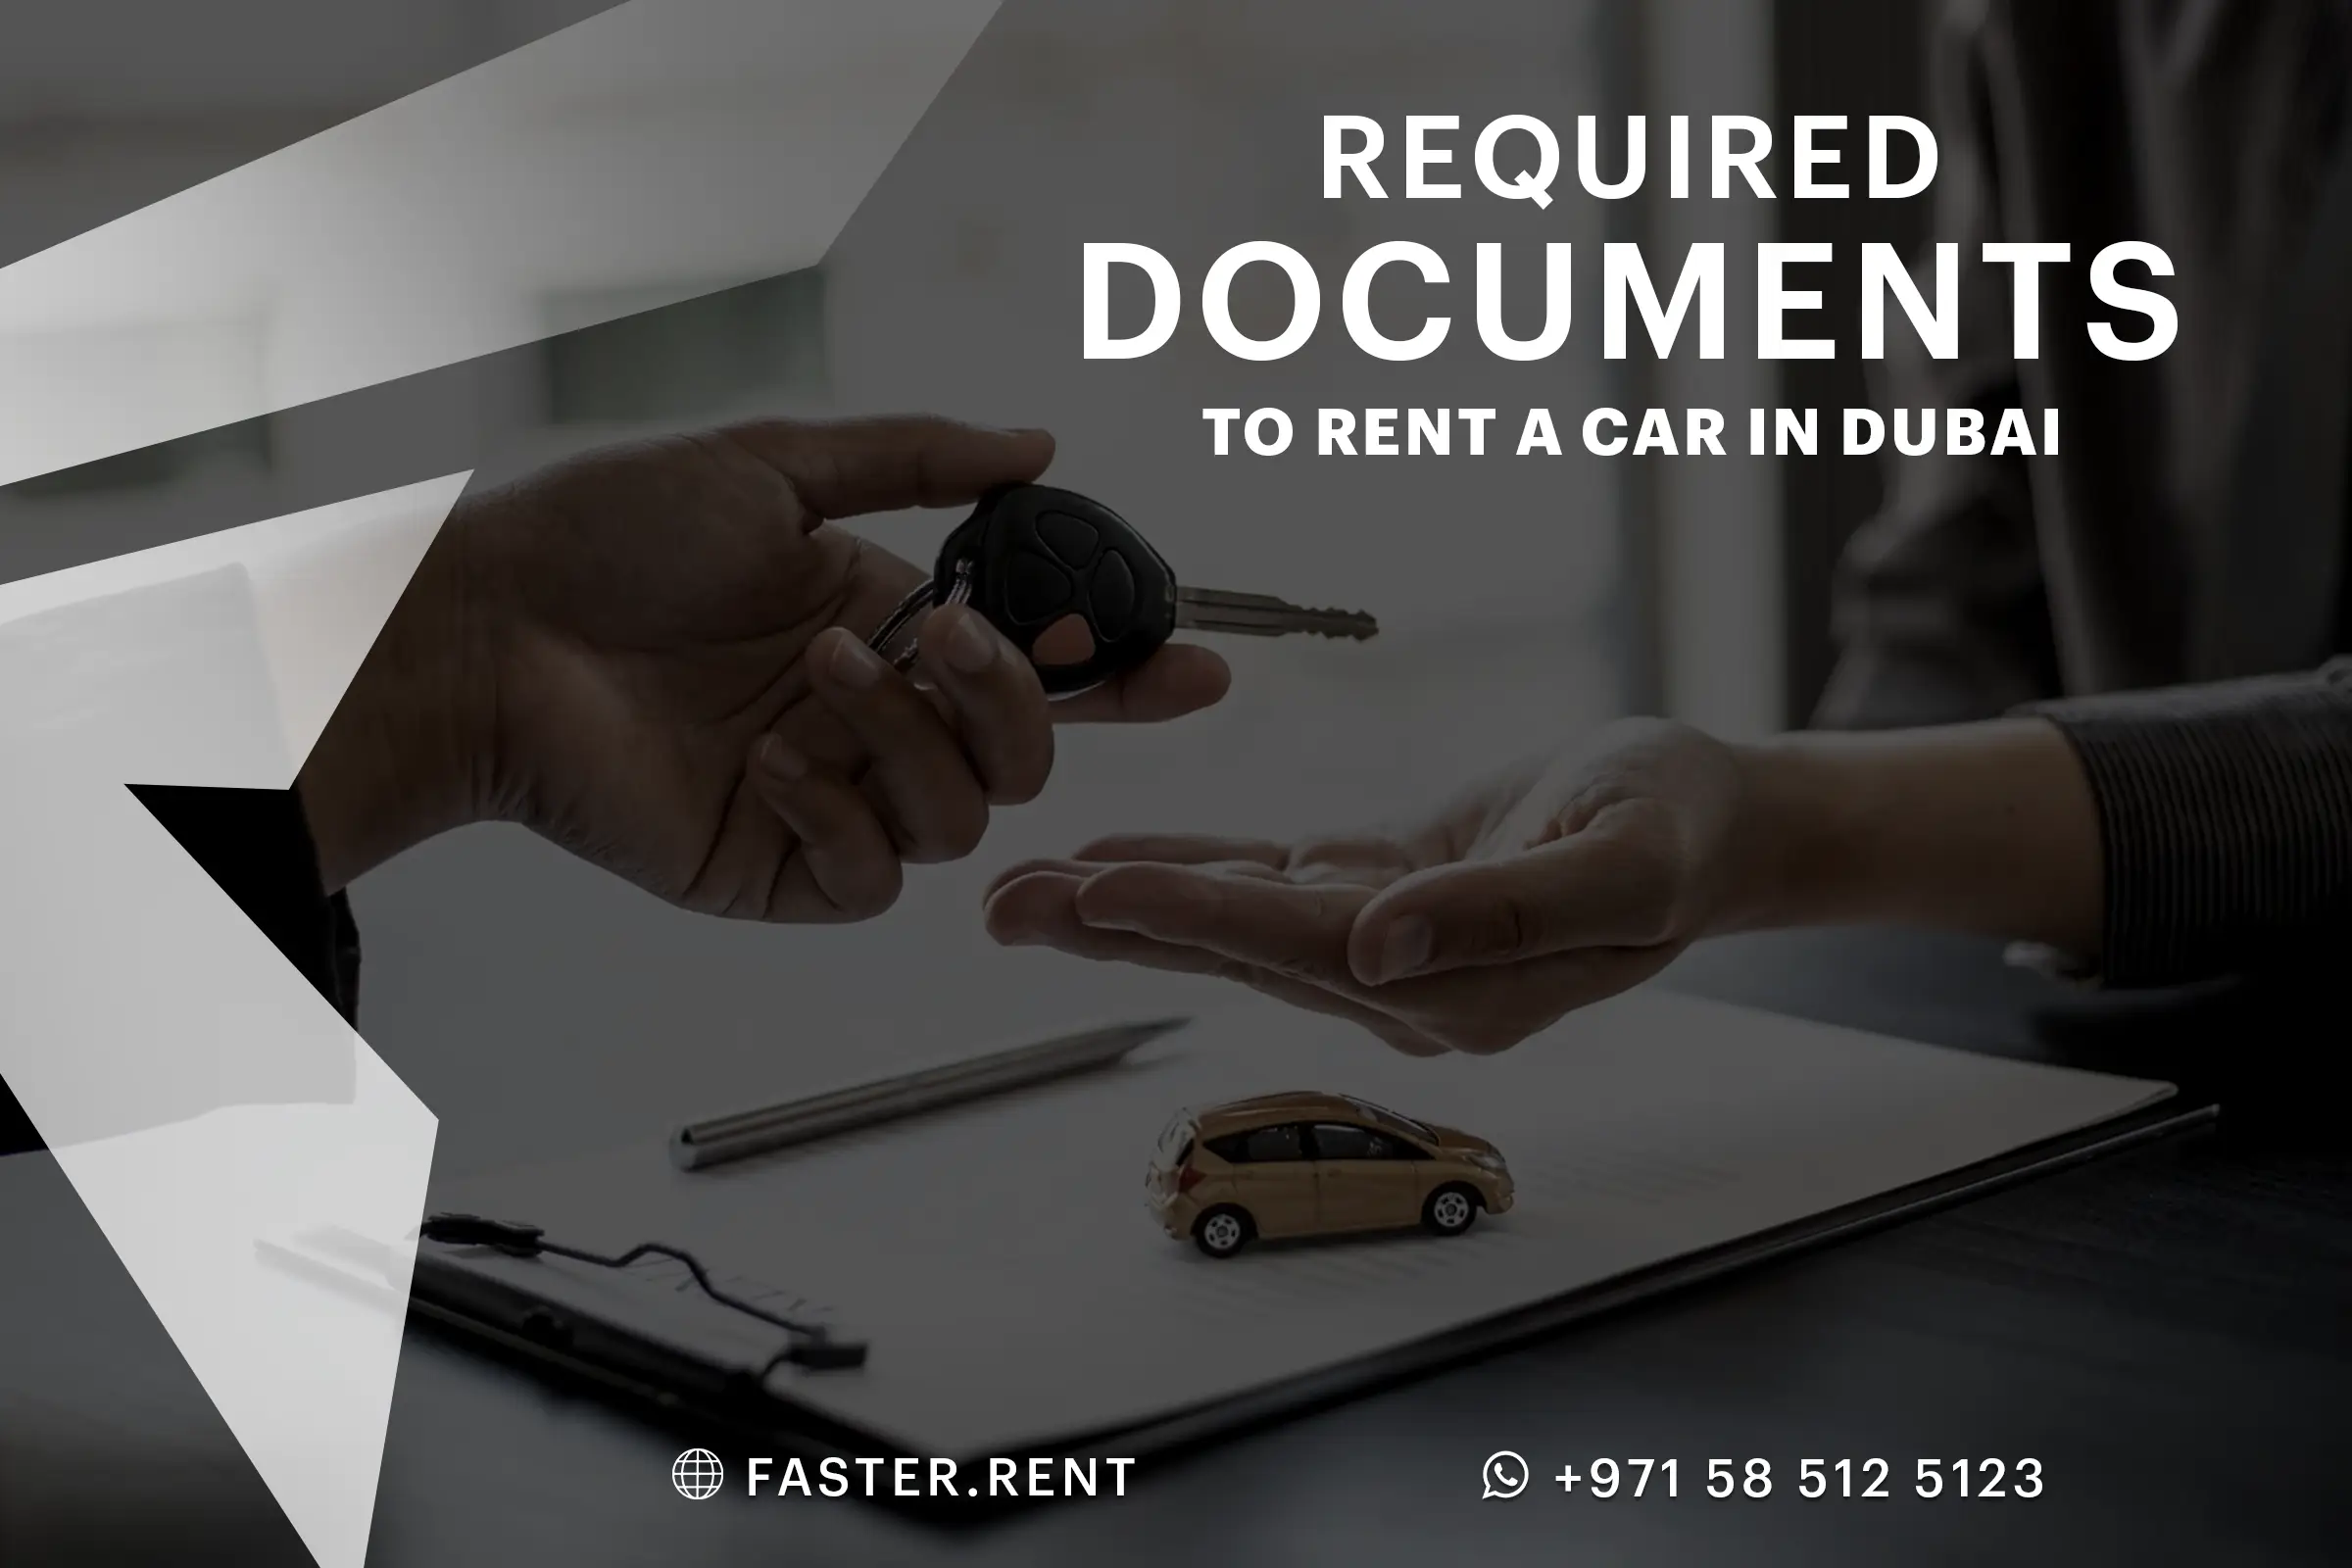 Documents Required to Rent a Car in Dubai UAE